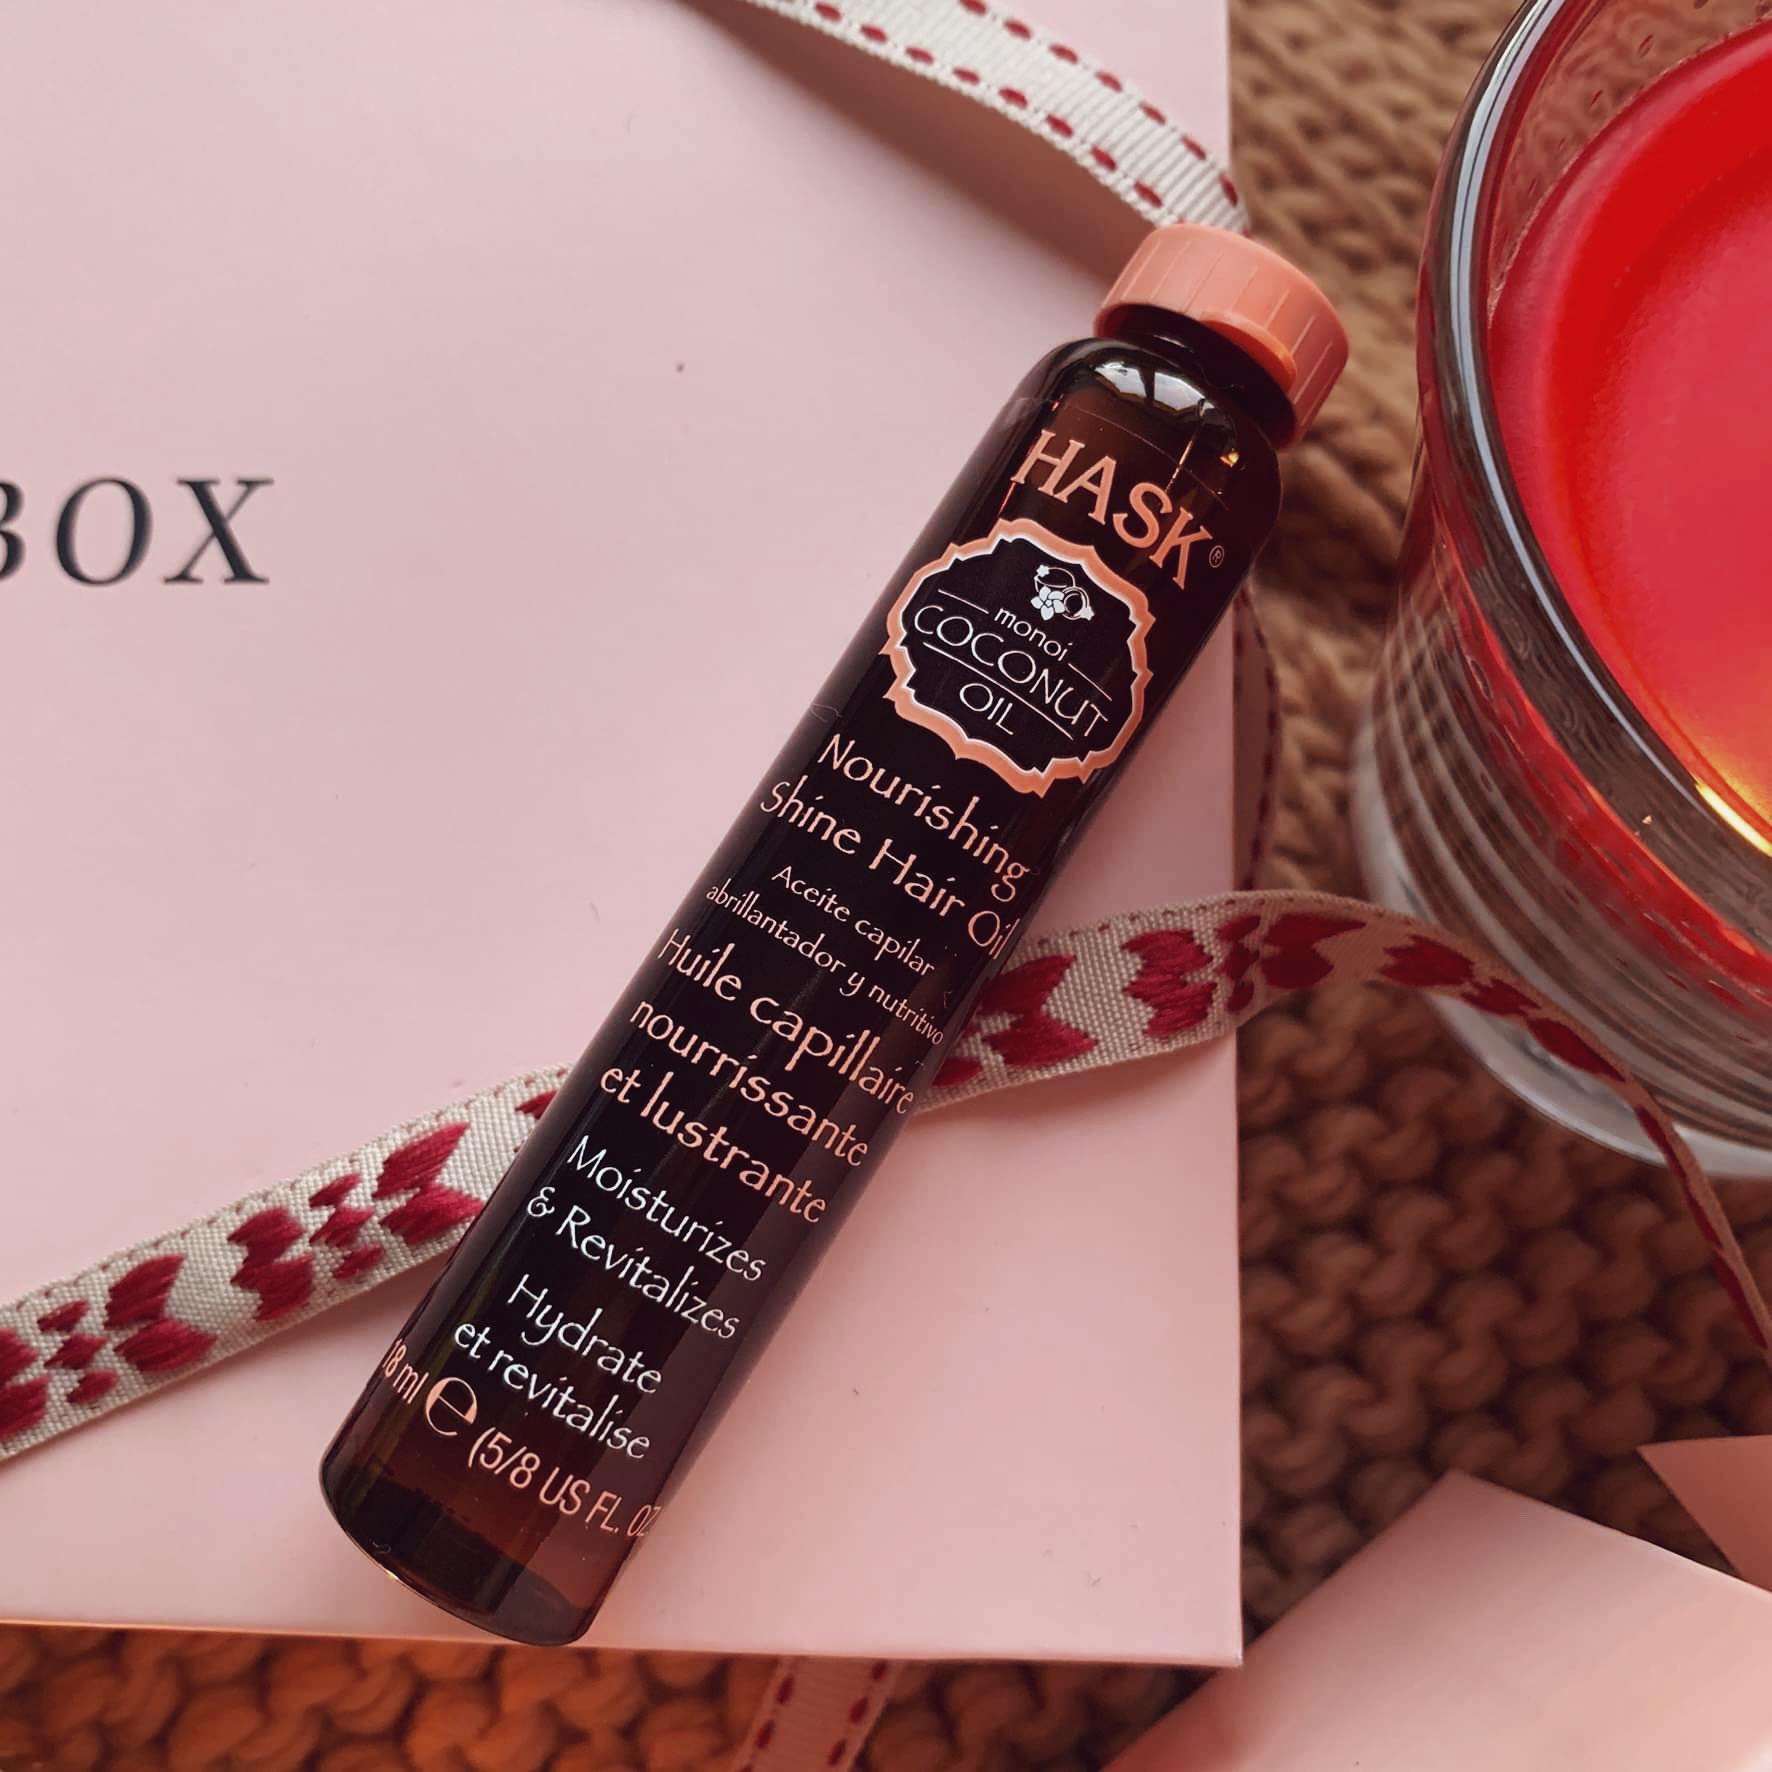 Hask Exotics Hair Oil - November 2019 Glossybox Review - Miss Boux